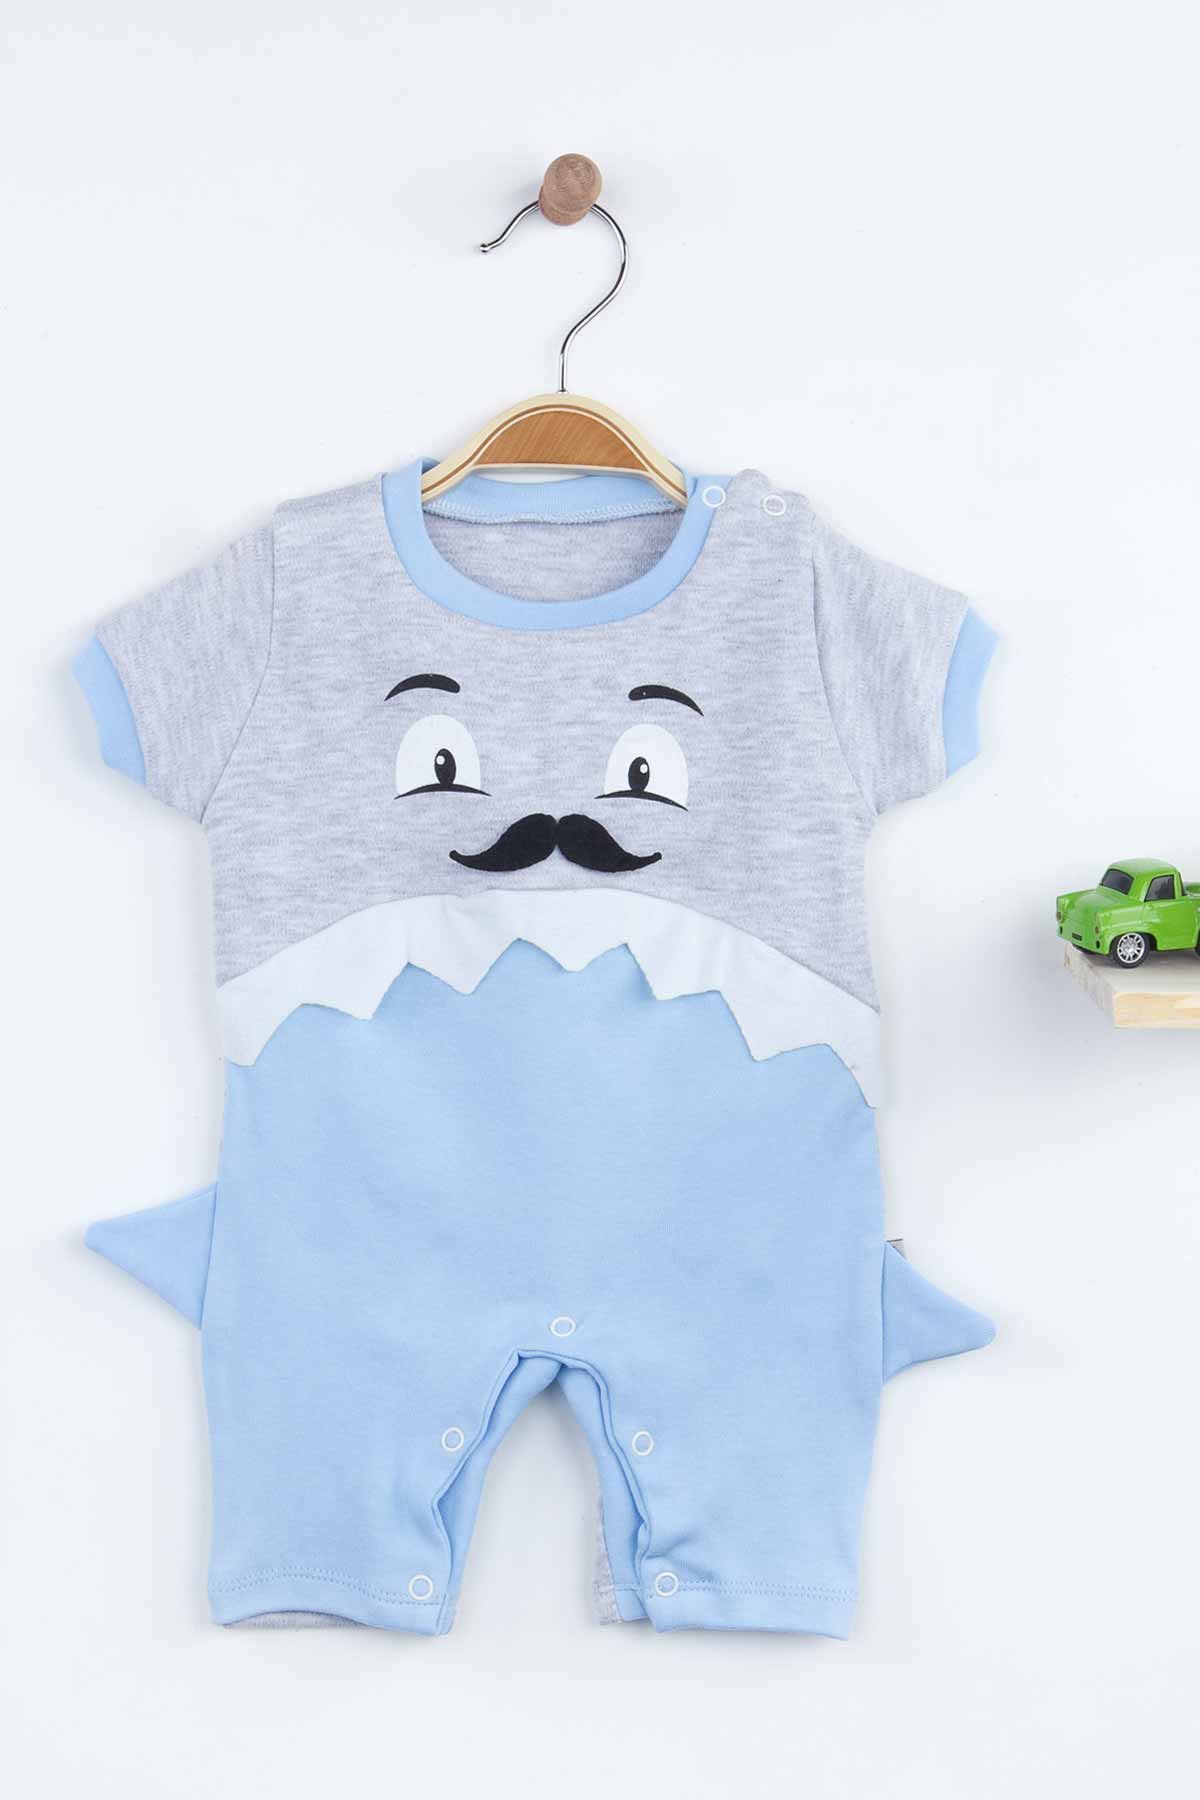 Blue Summer Shark Baby Boy Rompers Fashion 2021 New Season Style Babies Clothes Outfit Cotton Comfortable Underwear for Boys Baby